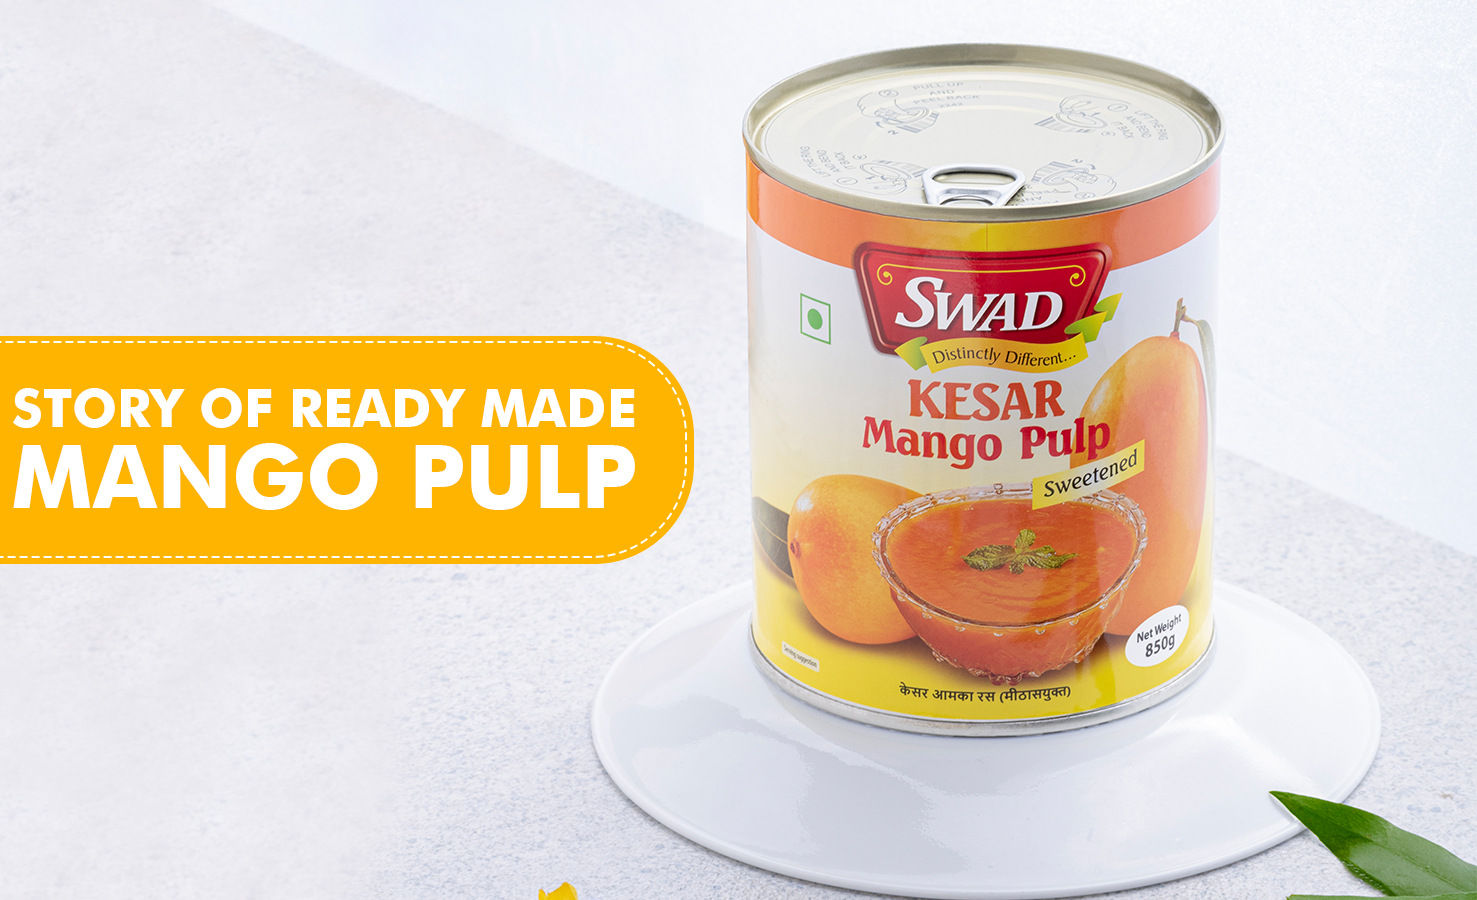 Is Readymade Mango Pulp Good To Cook Different Dishes?